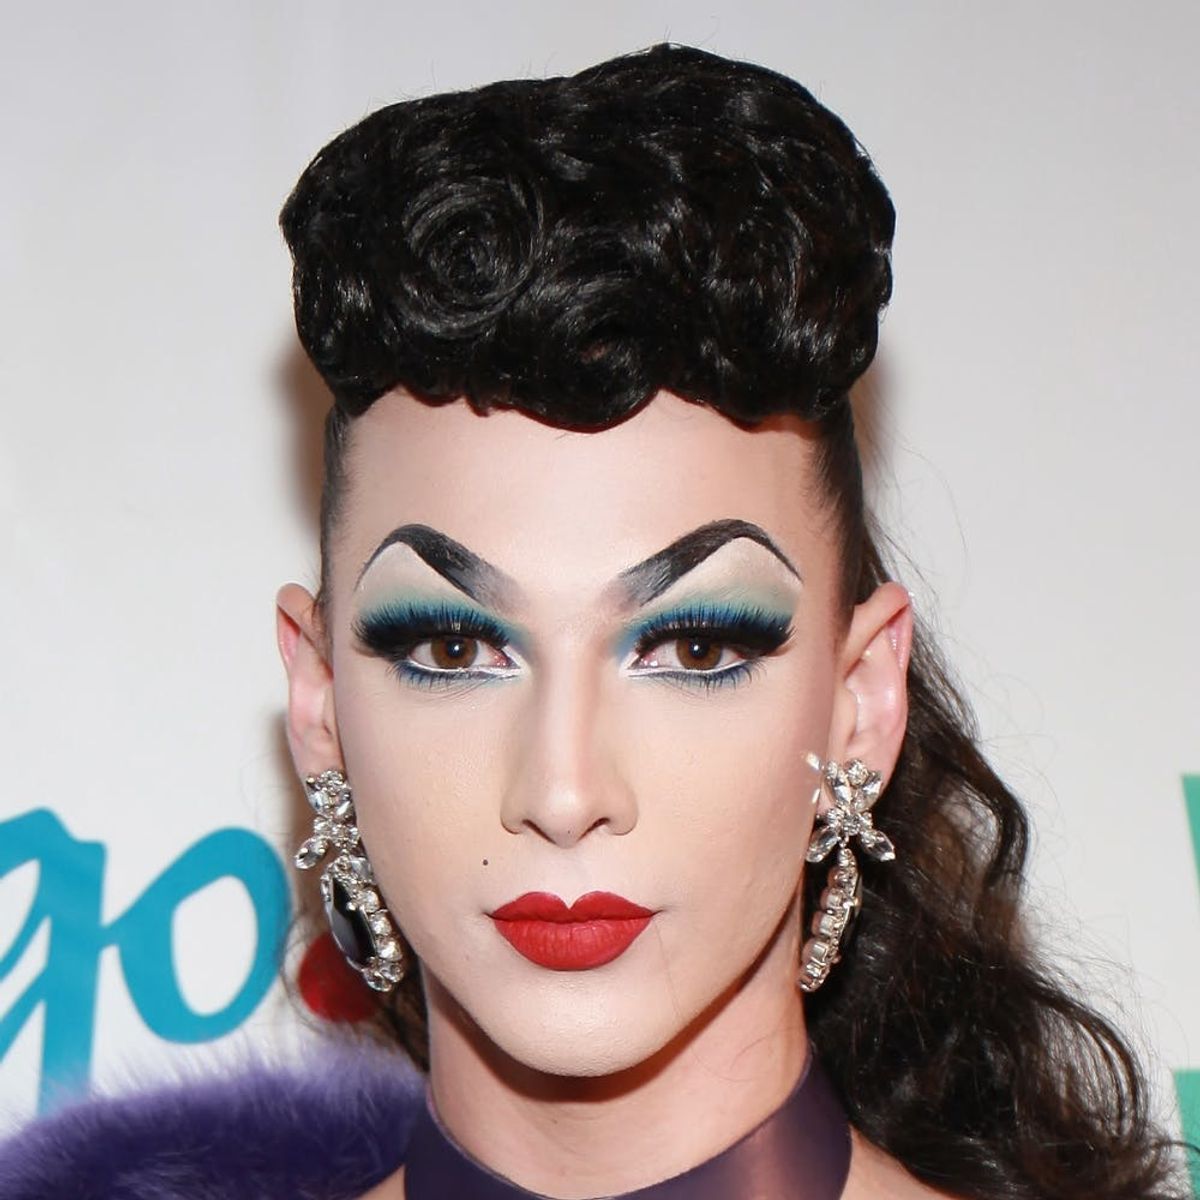 Violet Chachki Just Made History As the First Drag Queen to Front a Lingerie Campaign